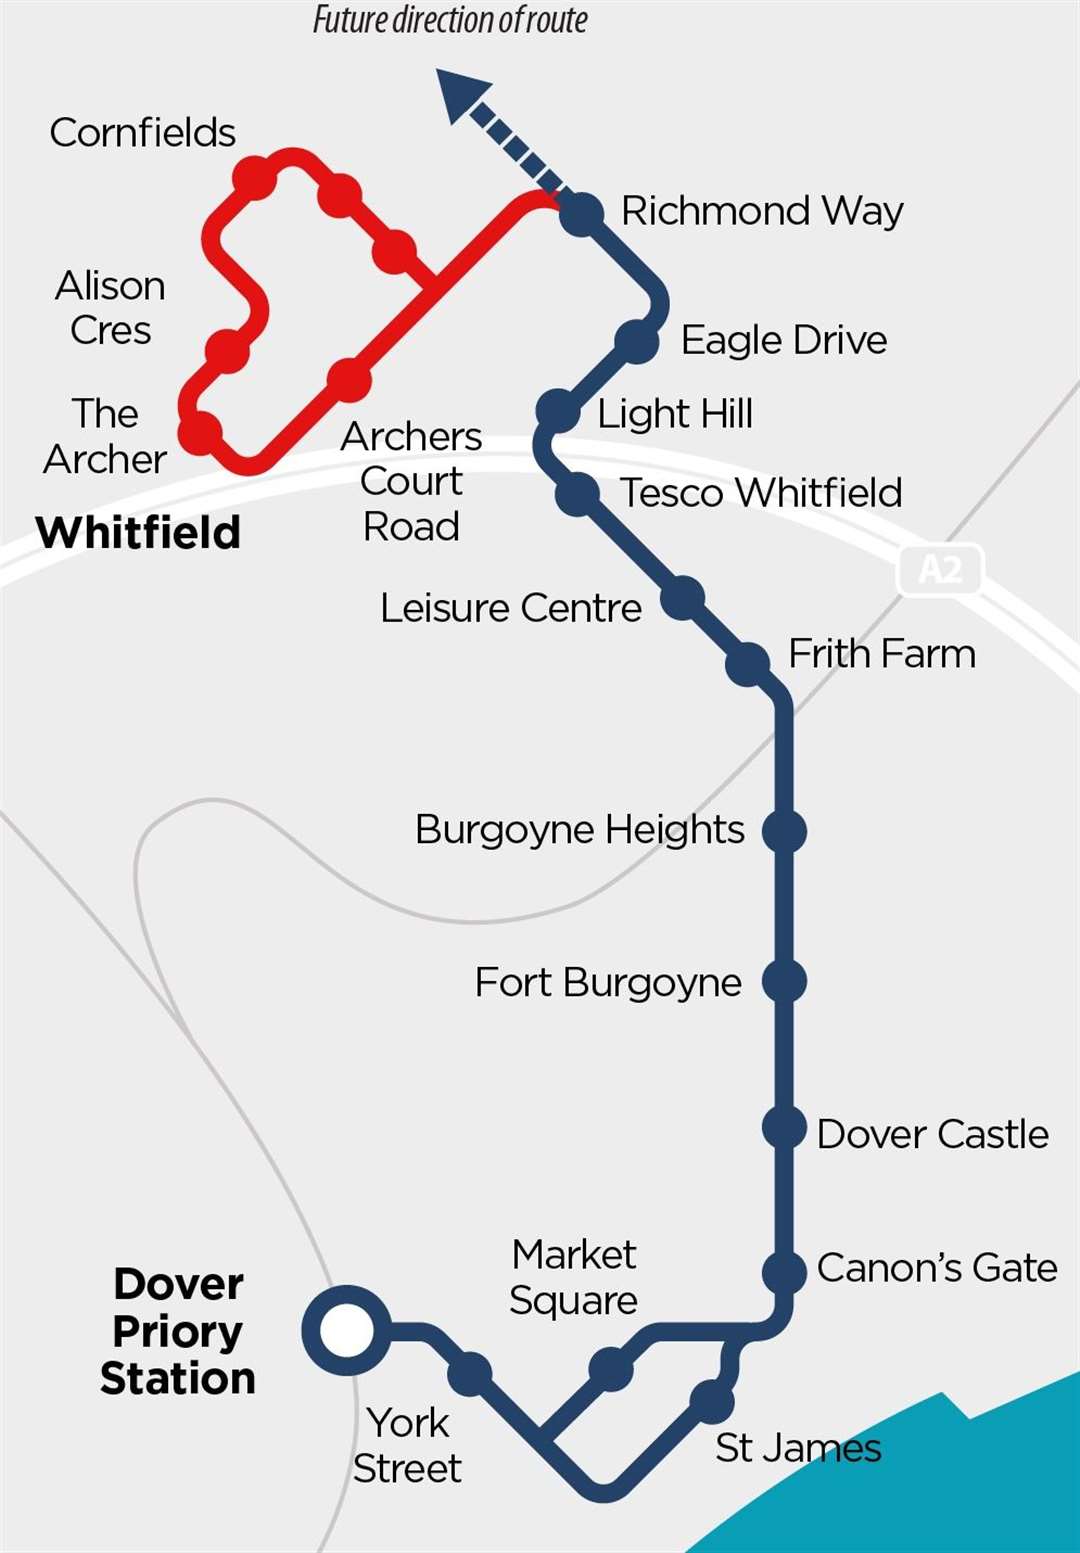 A map showing where the Dover Fastrack route is set to run